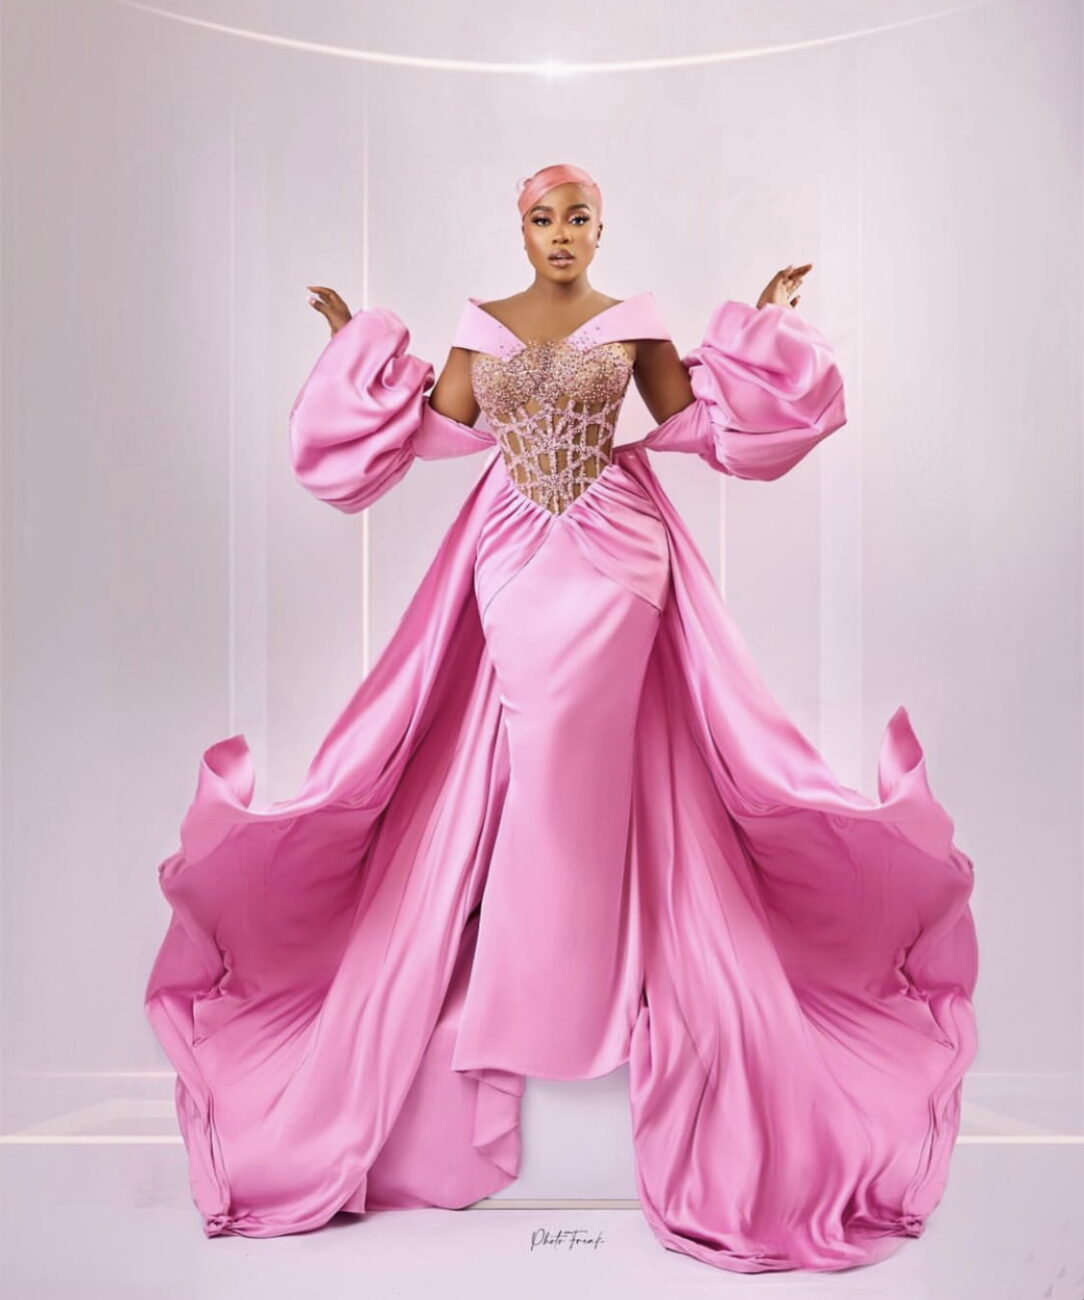 Veekee James in a dramatic pink dress with a cape.